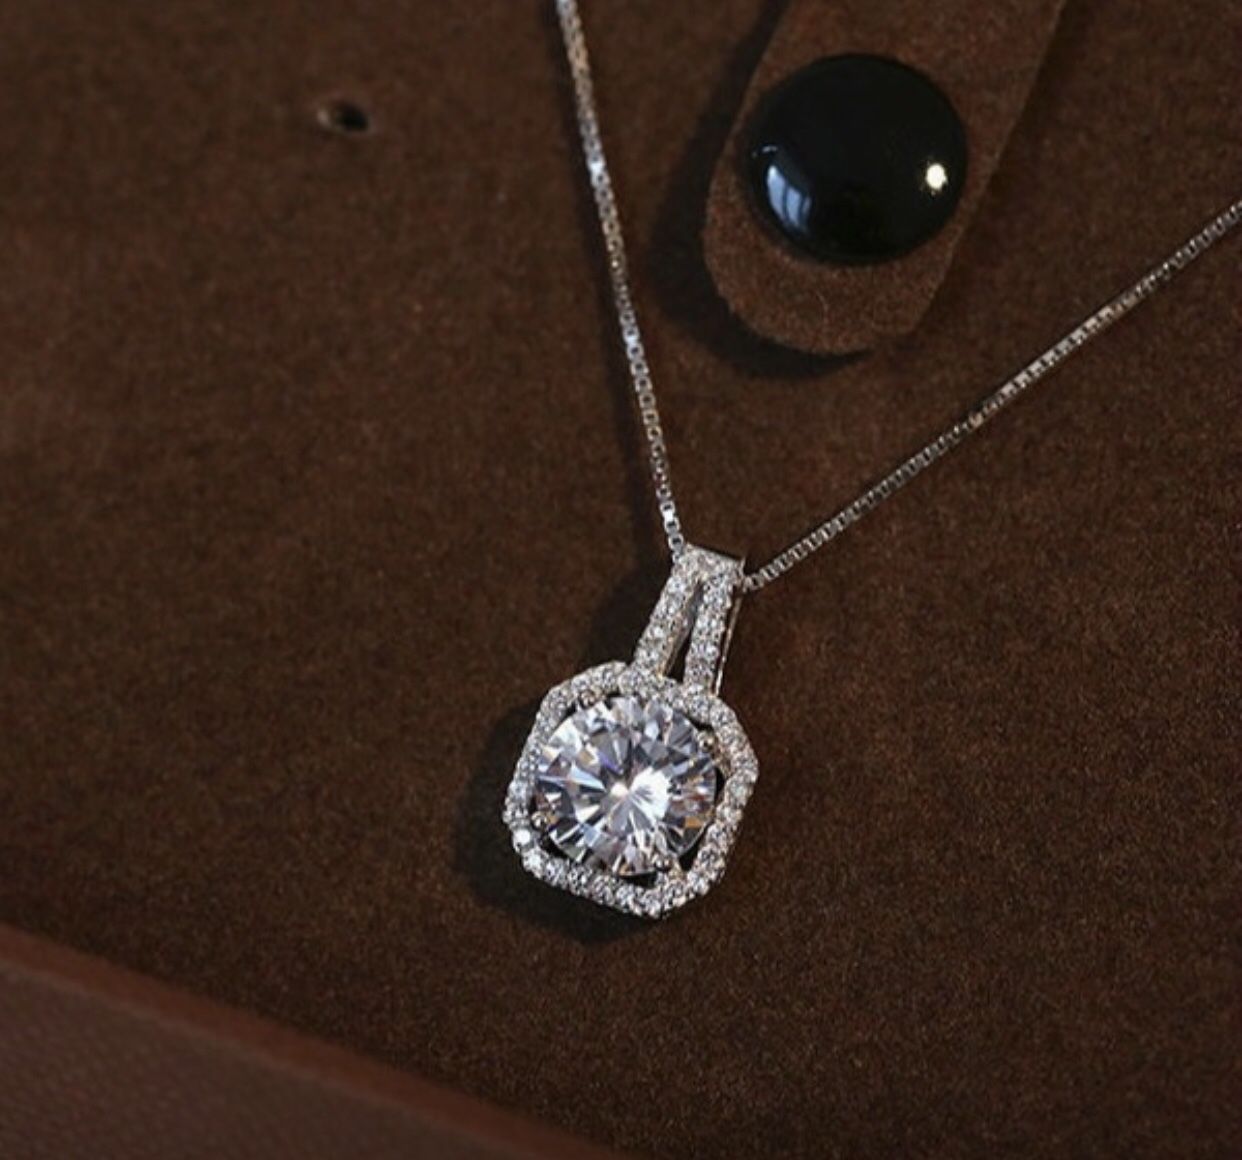 S925 Zircon Square Diamond Necklace, Women's Short Collarbone Pendant Jewelry Sets (Ring + Necklace + Earrings). Ring size 6/7